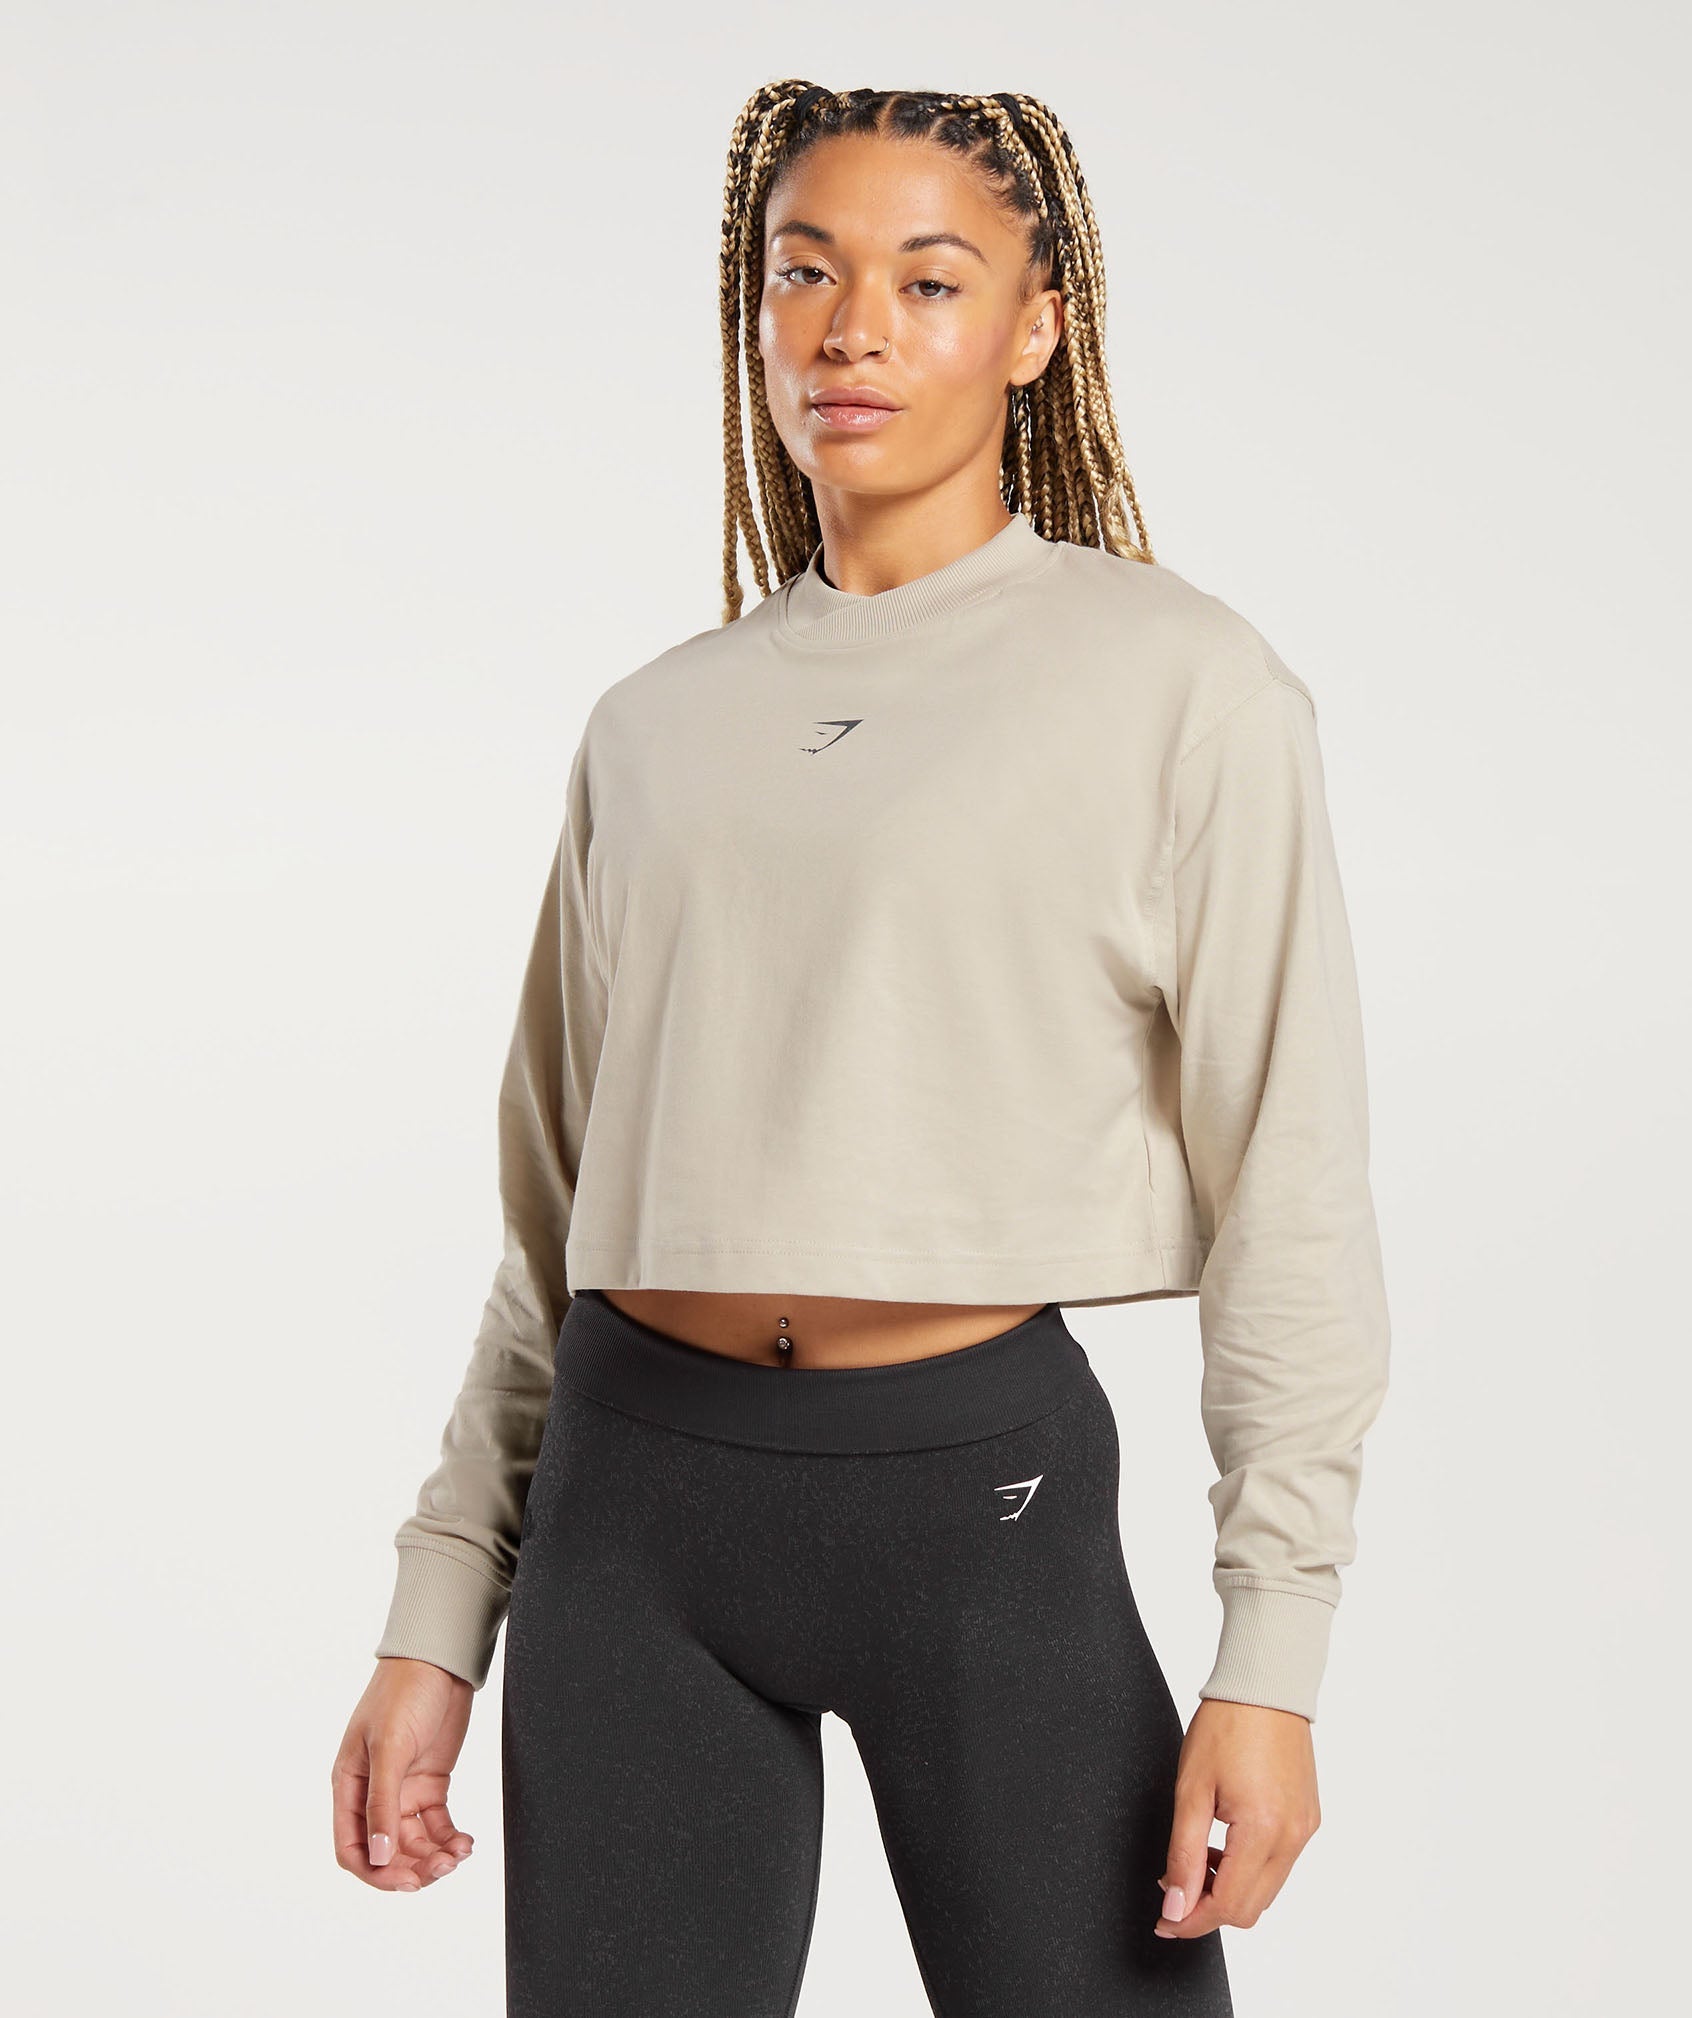 Committed To The Craft Long Sleeve Top in Brown - view 2